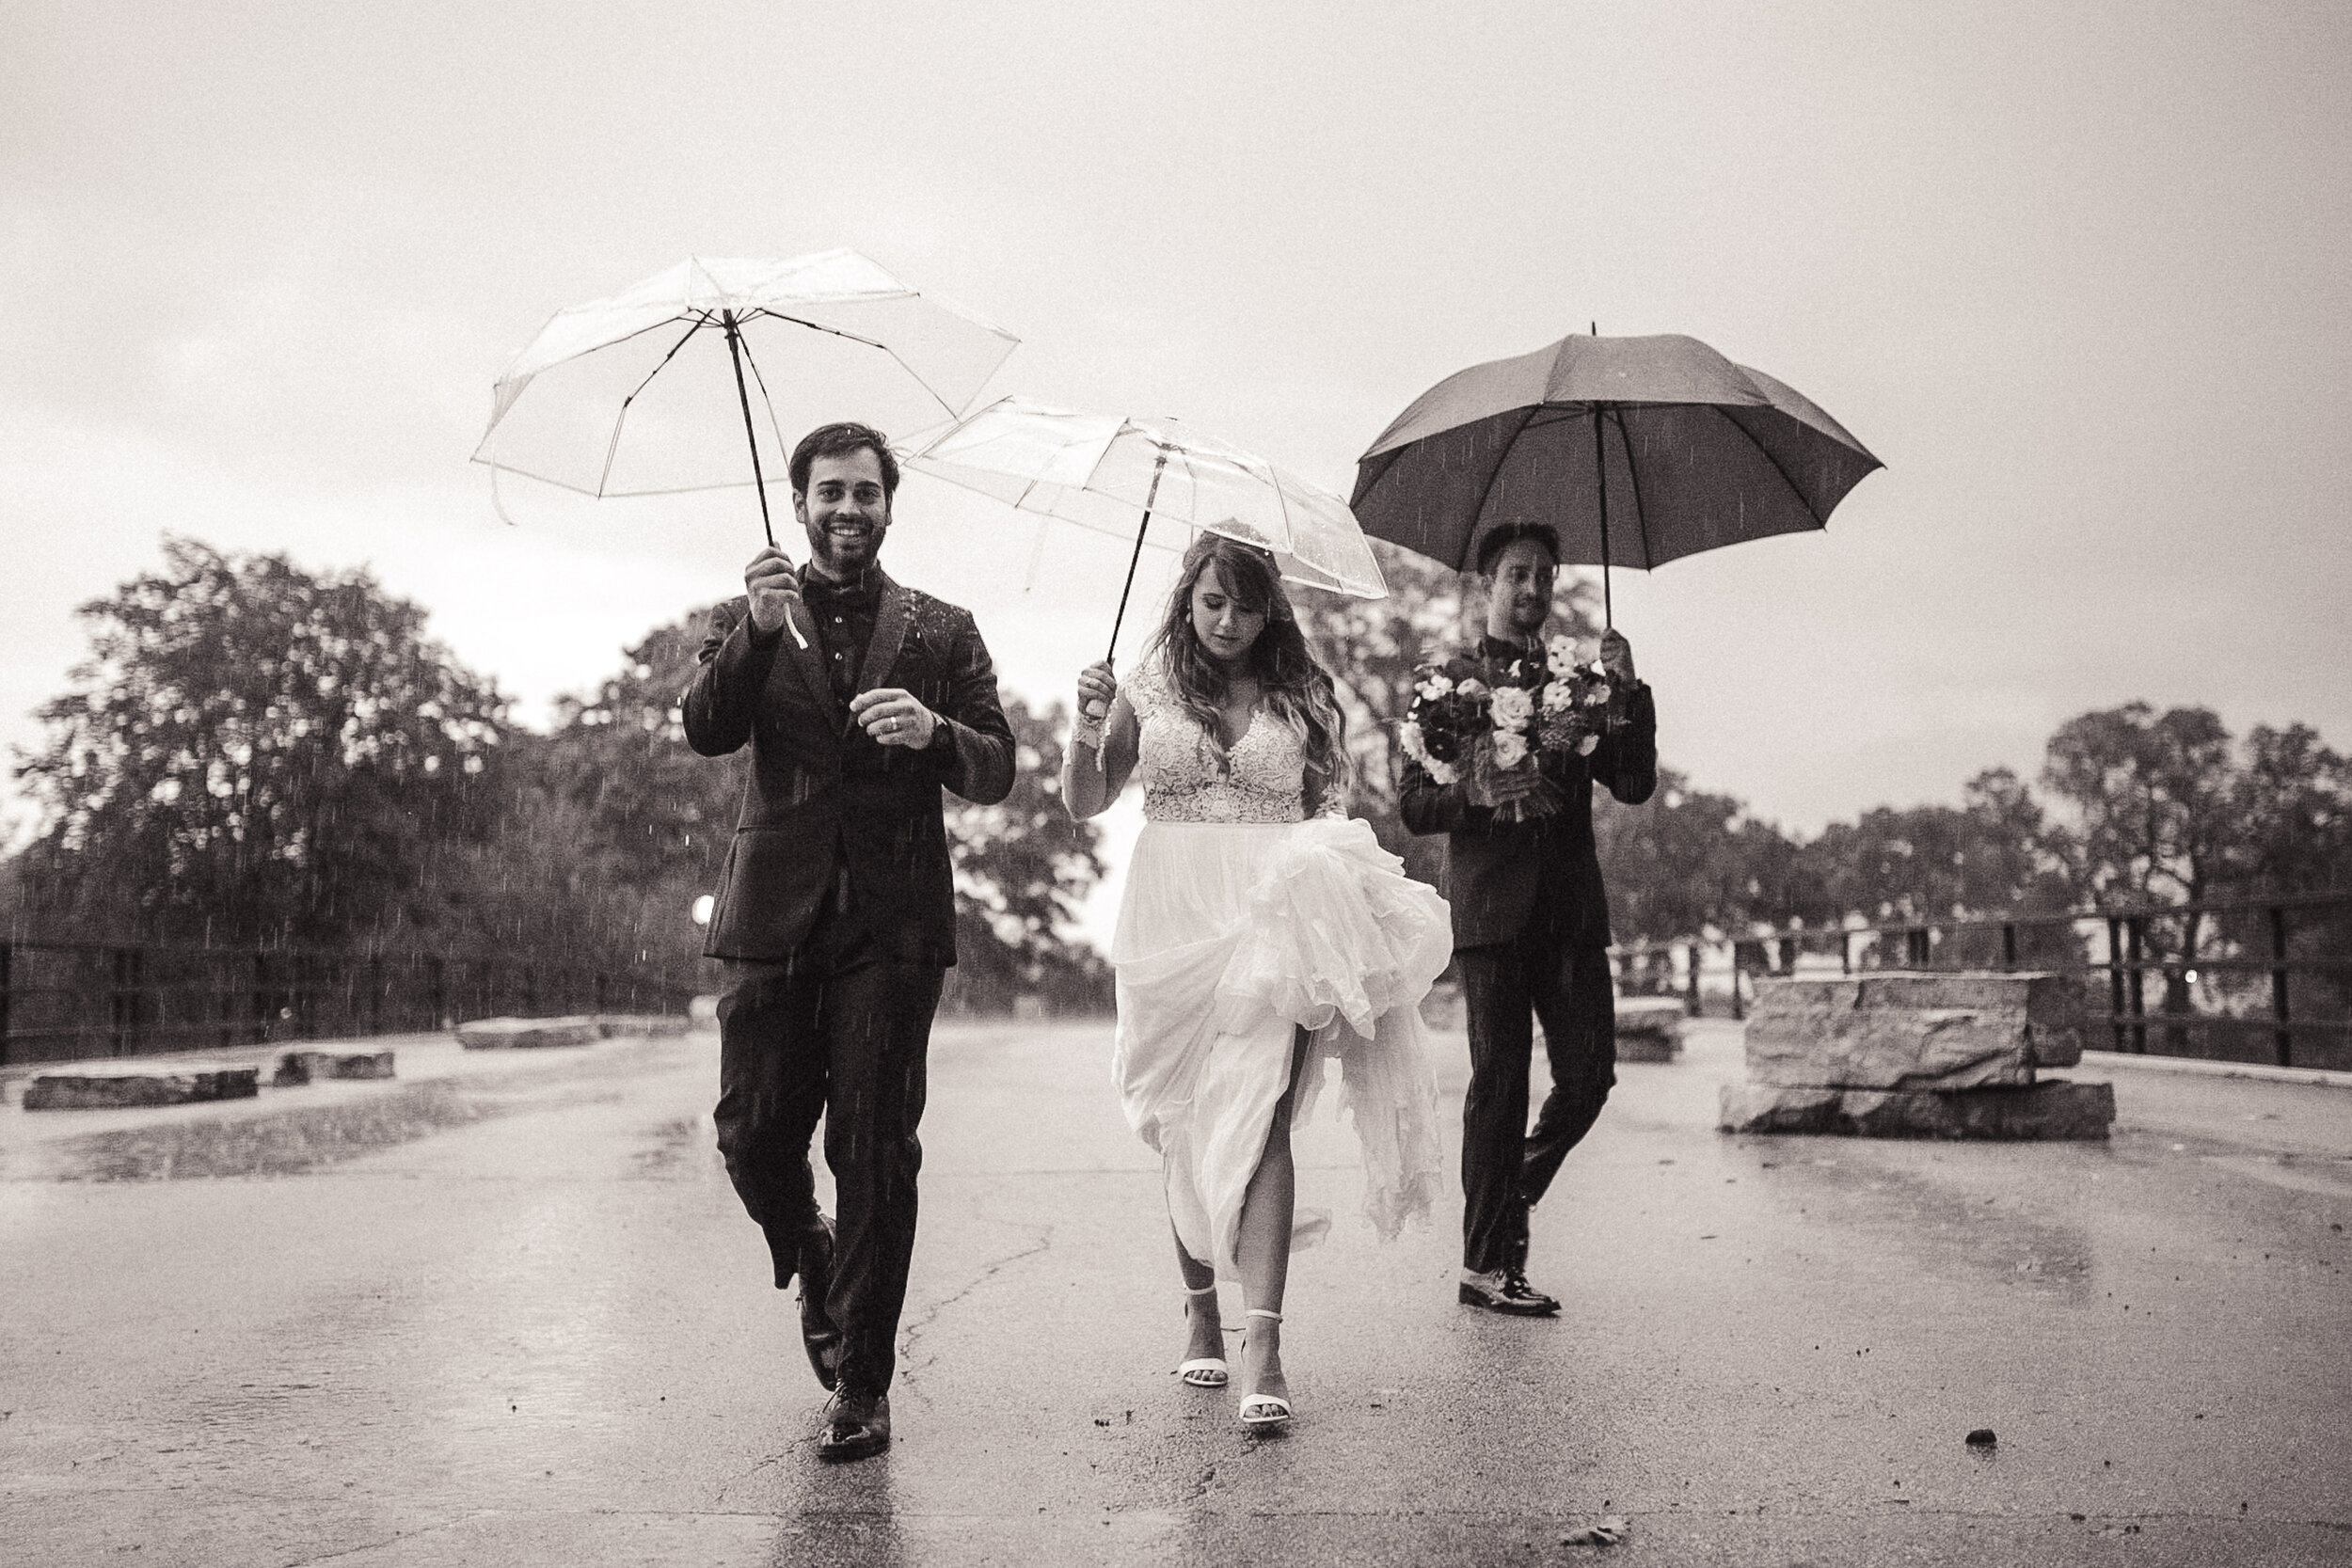 Rainy Day Wedding Photos: Modern Chicago wedding at Ovation captured by This Is Feeling Photography. Find more Chicago wedding inspiration at CHItheeWED.com!